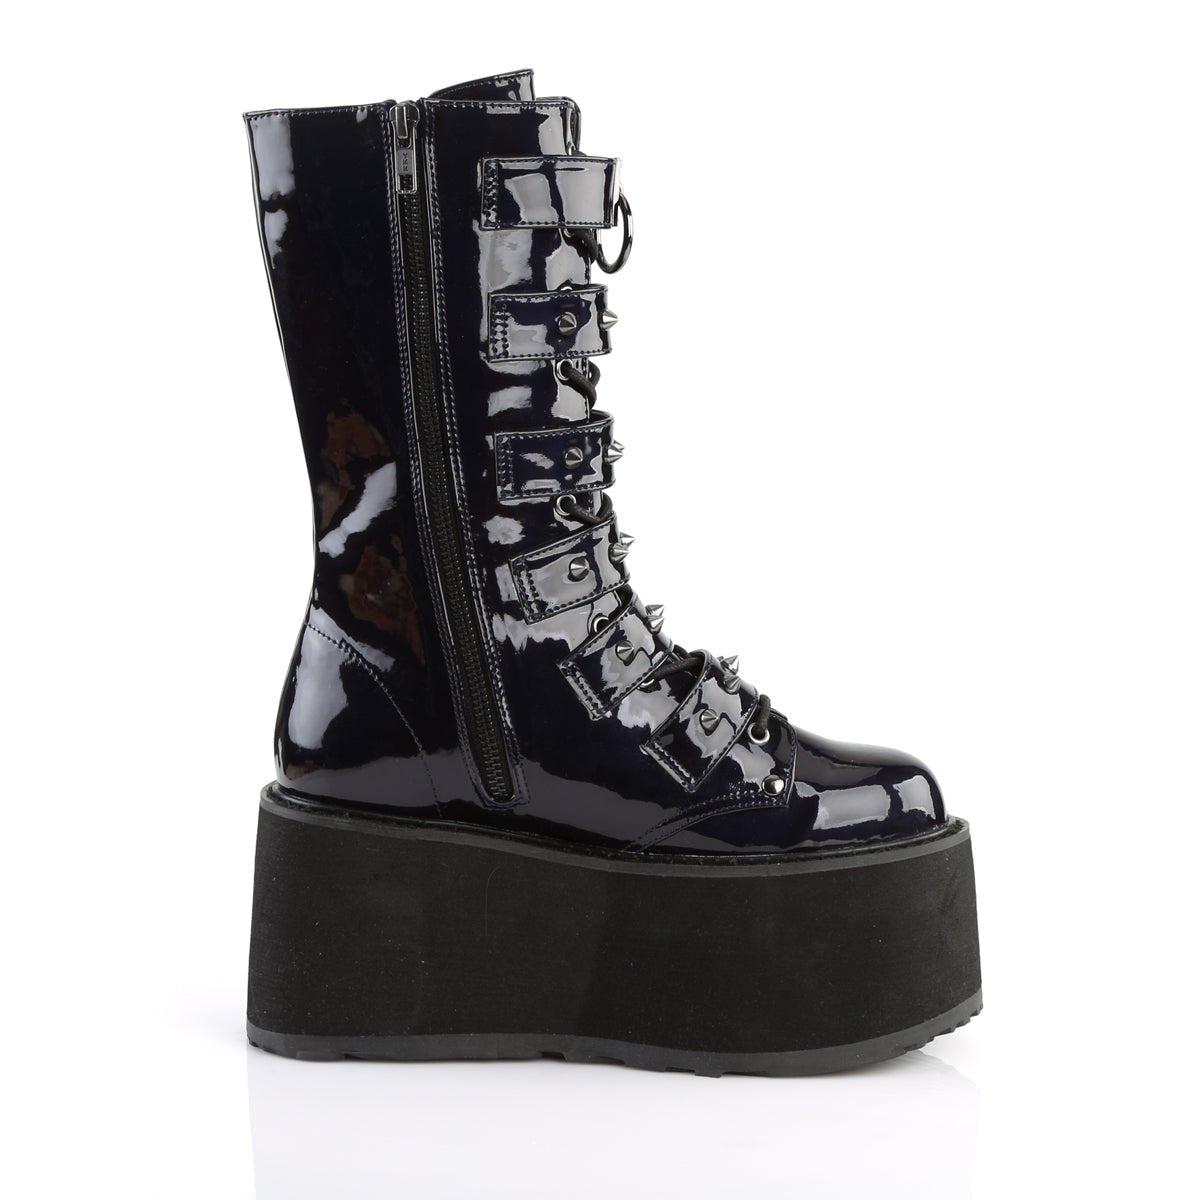 Too Fast | Demonia Damned 225 | Black Holographic Vegan Leather Women's Mid Calf Boots